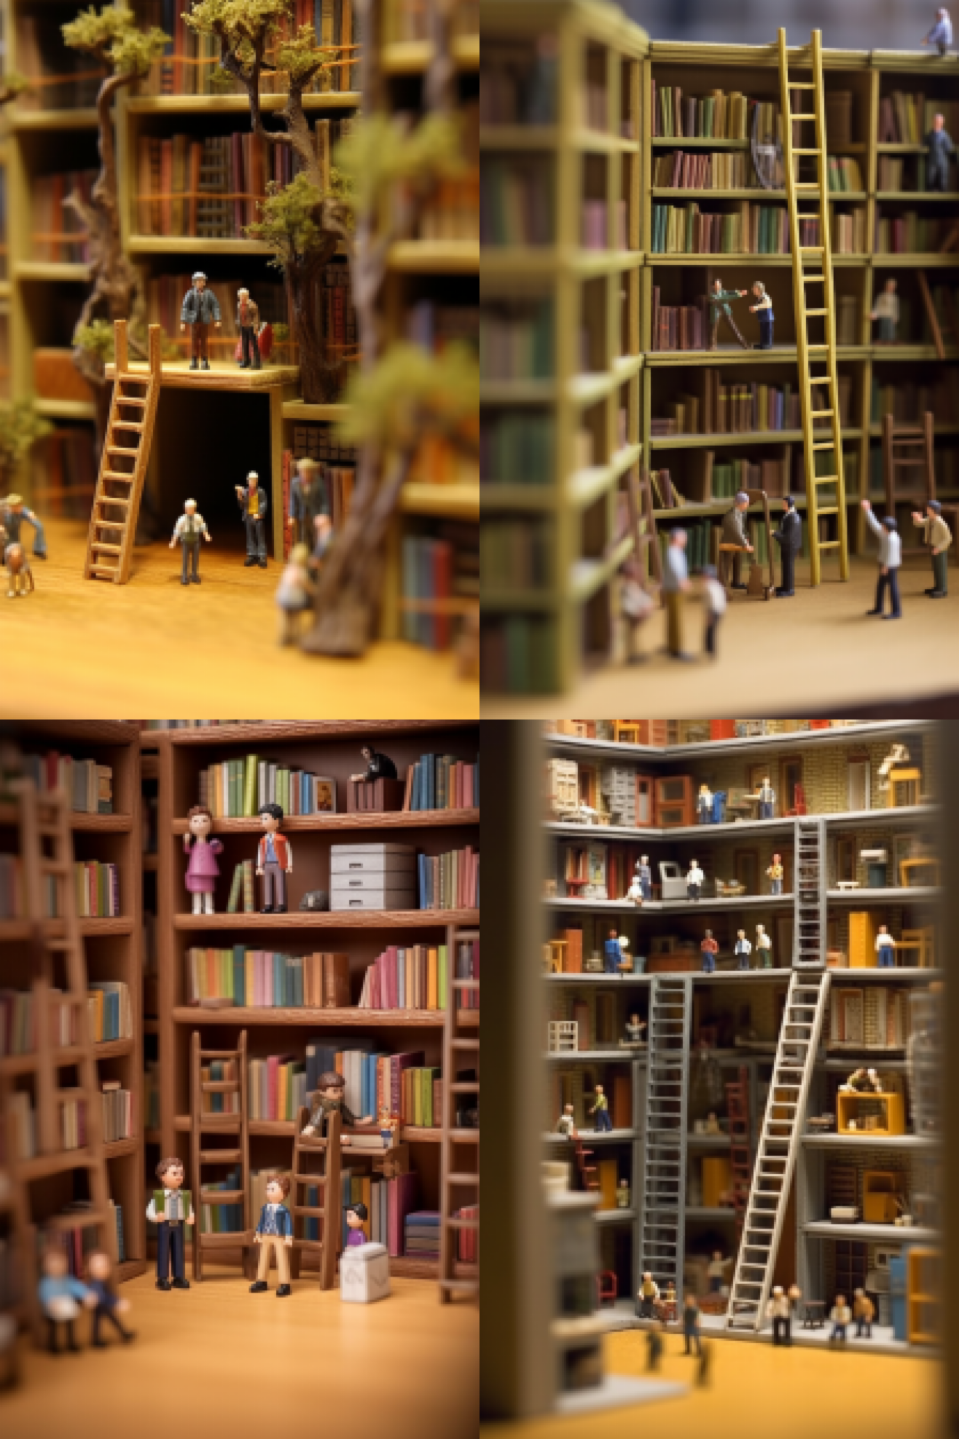 1989 documentary film of tiny people living between books on a library bookshelf :: miniature people, miniature library bookshelf, honey...